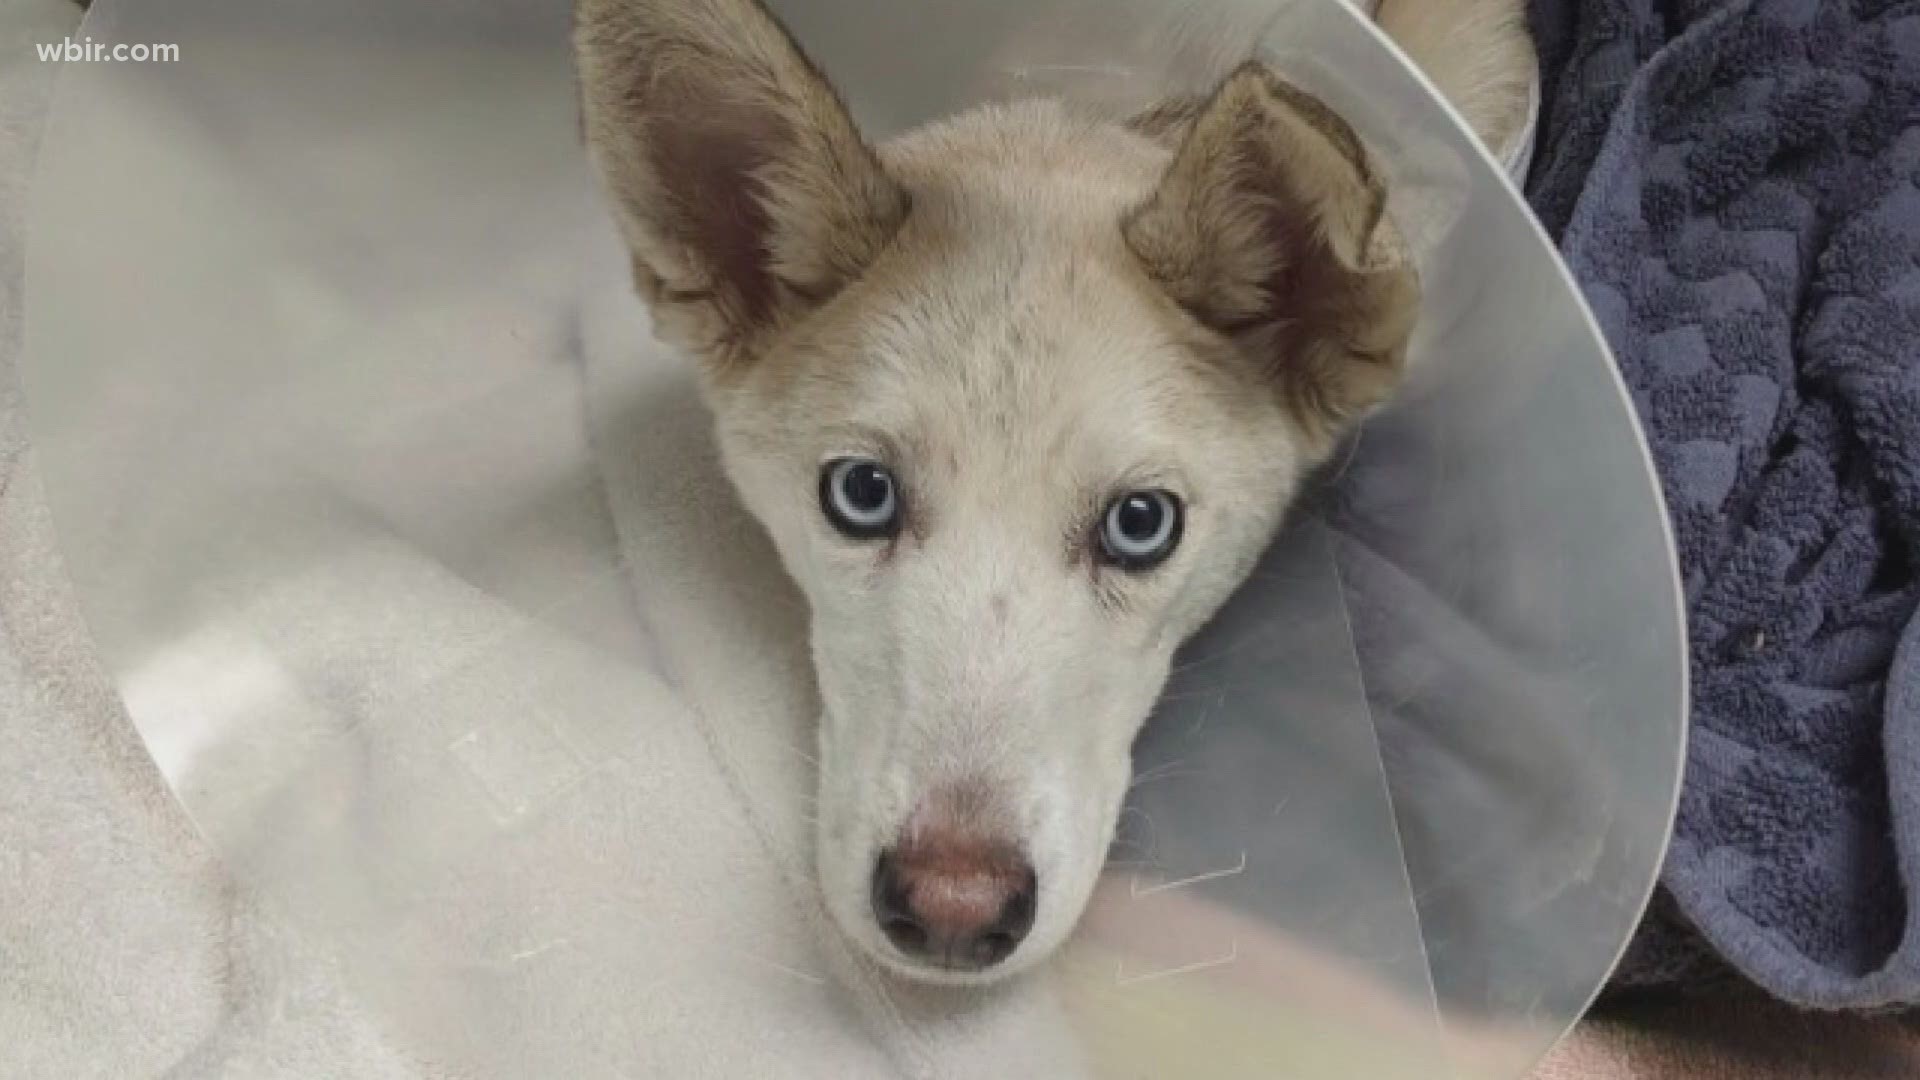 A dog Knoxville police think was thrown from an overpass is recuperating in a foster home.